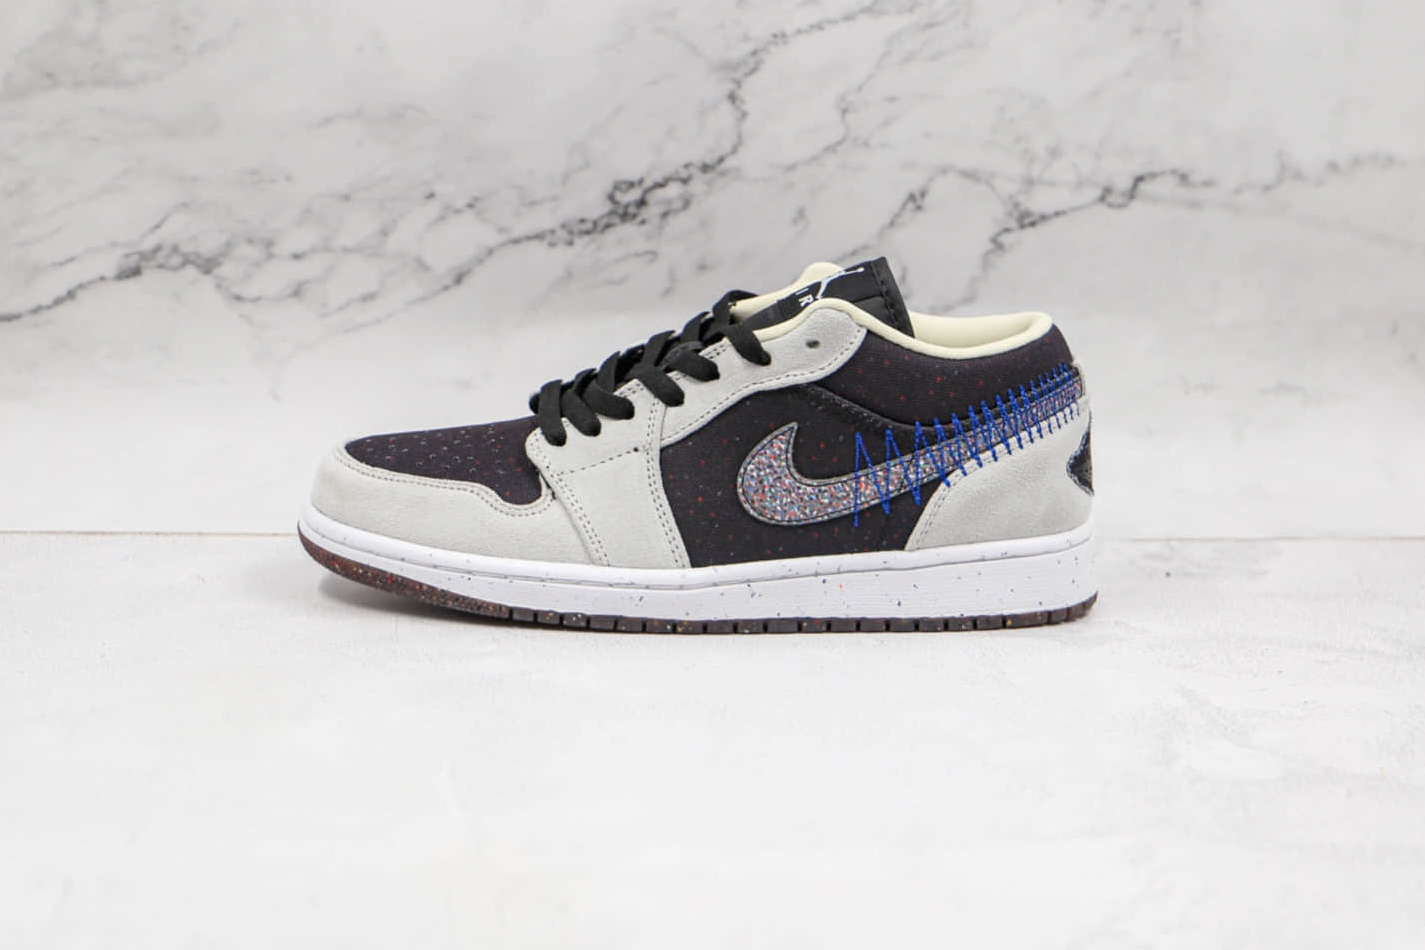 Air Jordan 1 Low Court Purple White 553558-500 - Stylish Sneakers for a Sporty Look